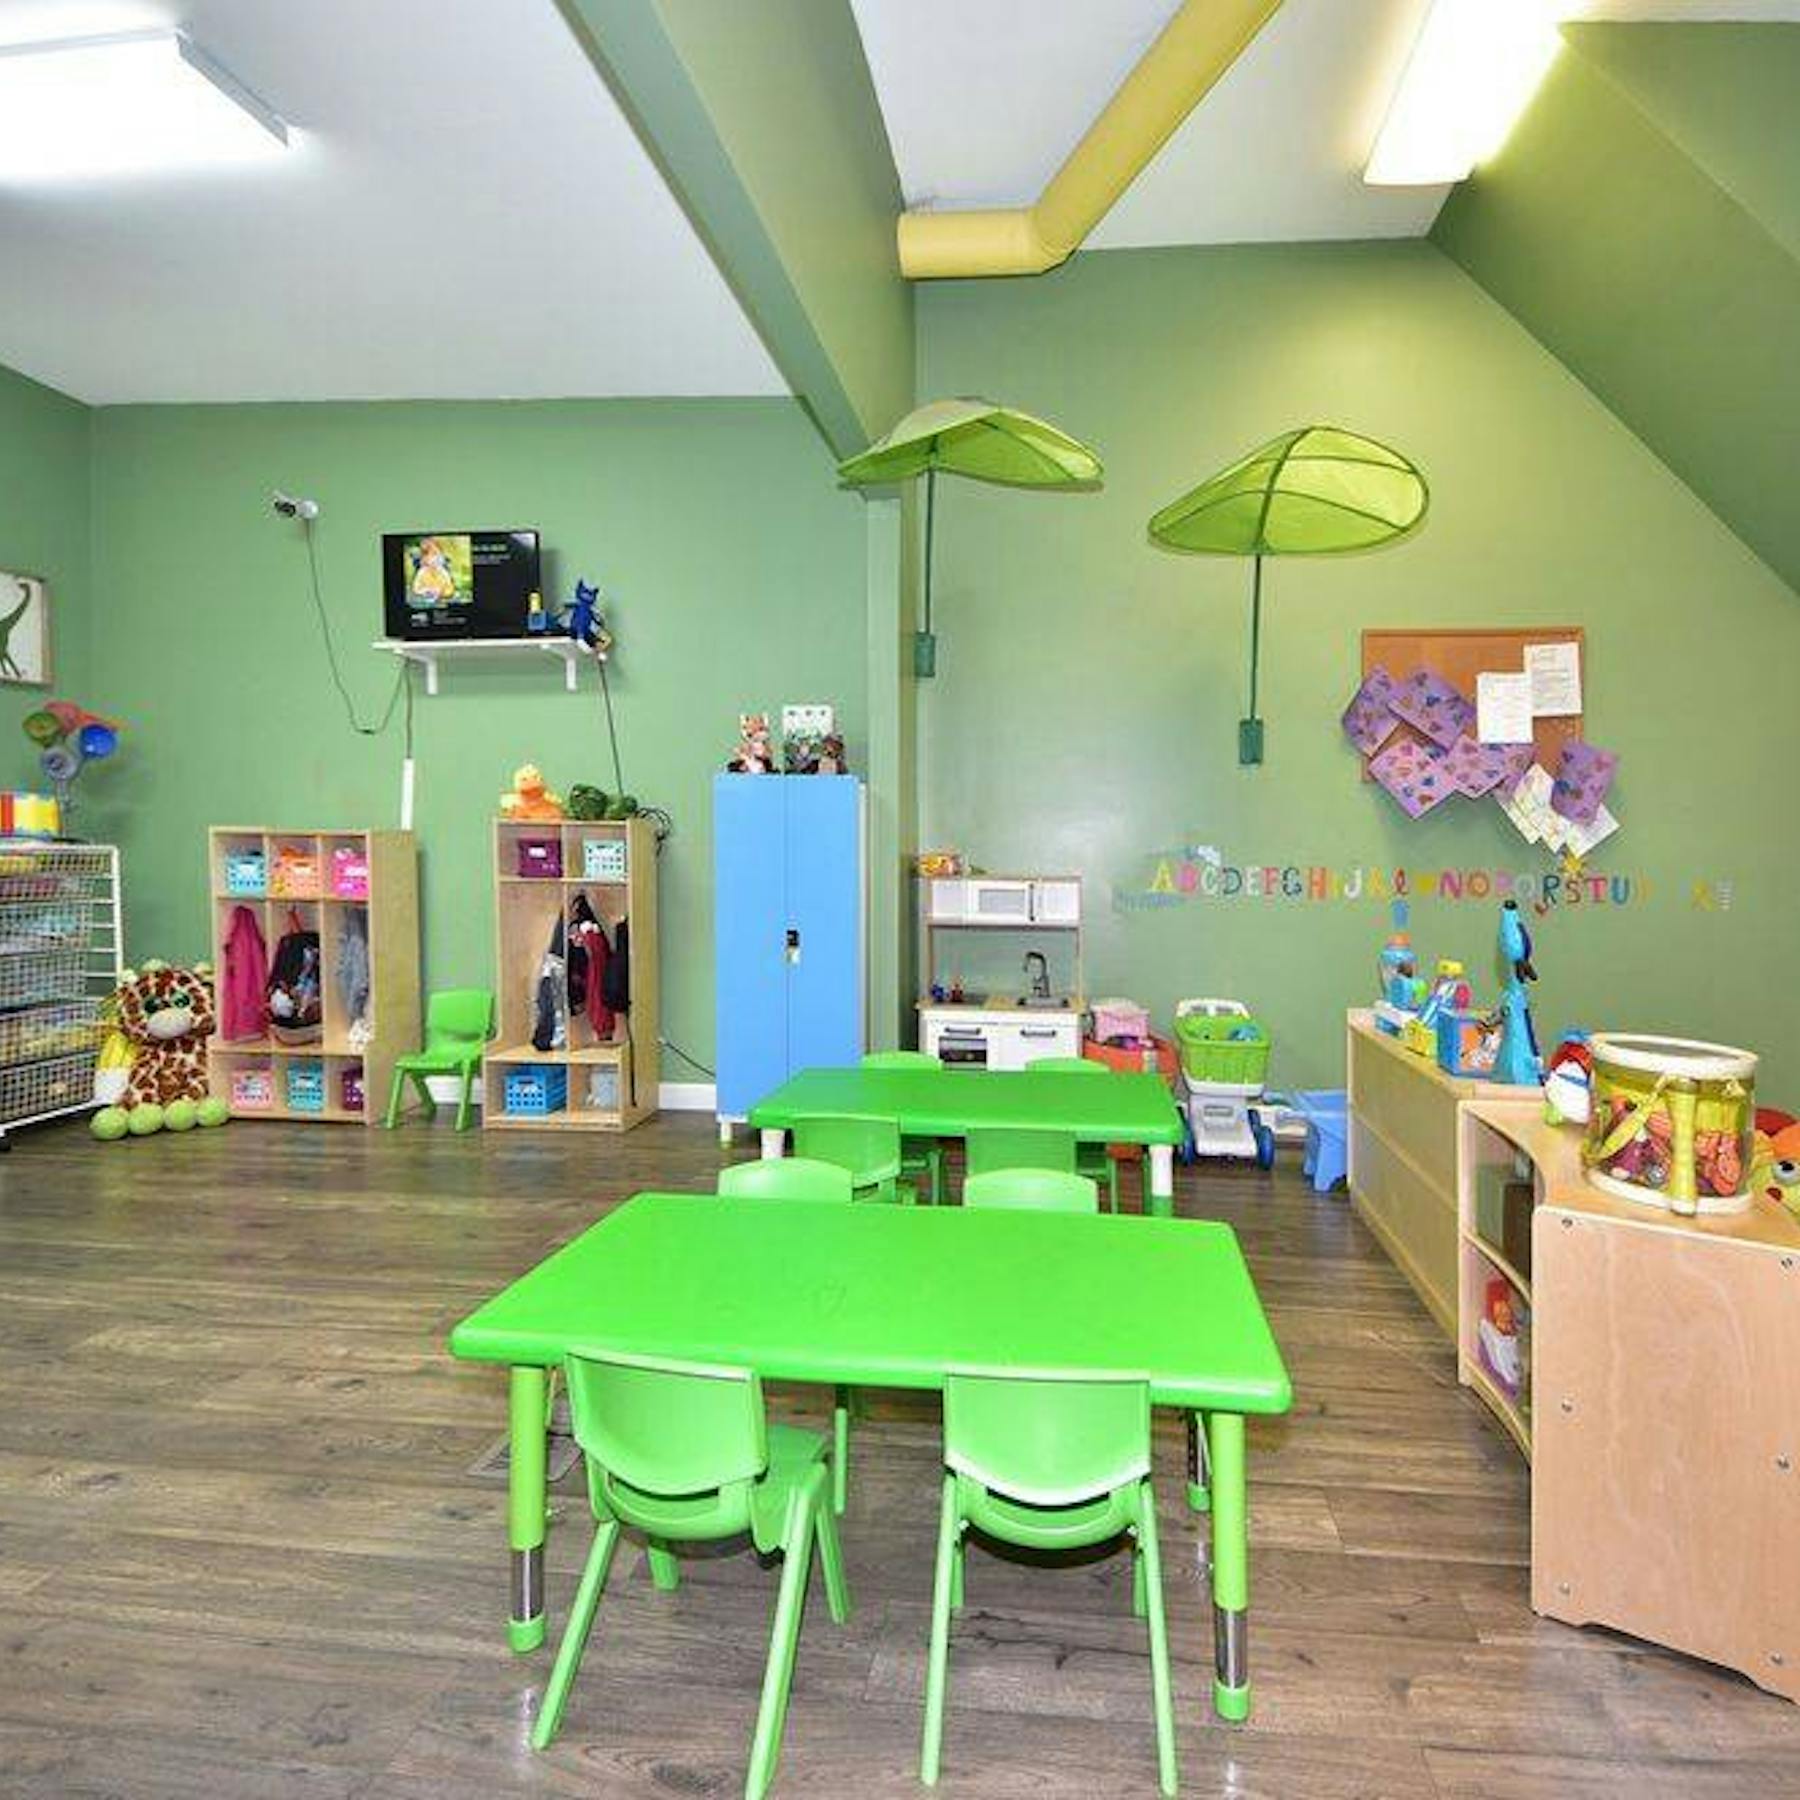 Little Precious Angels Childcare 2 LLC - Daycare in St. Louis, MO - Winnie